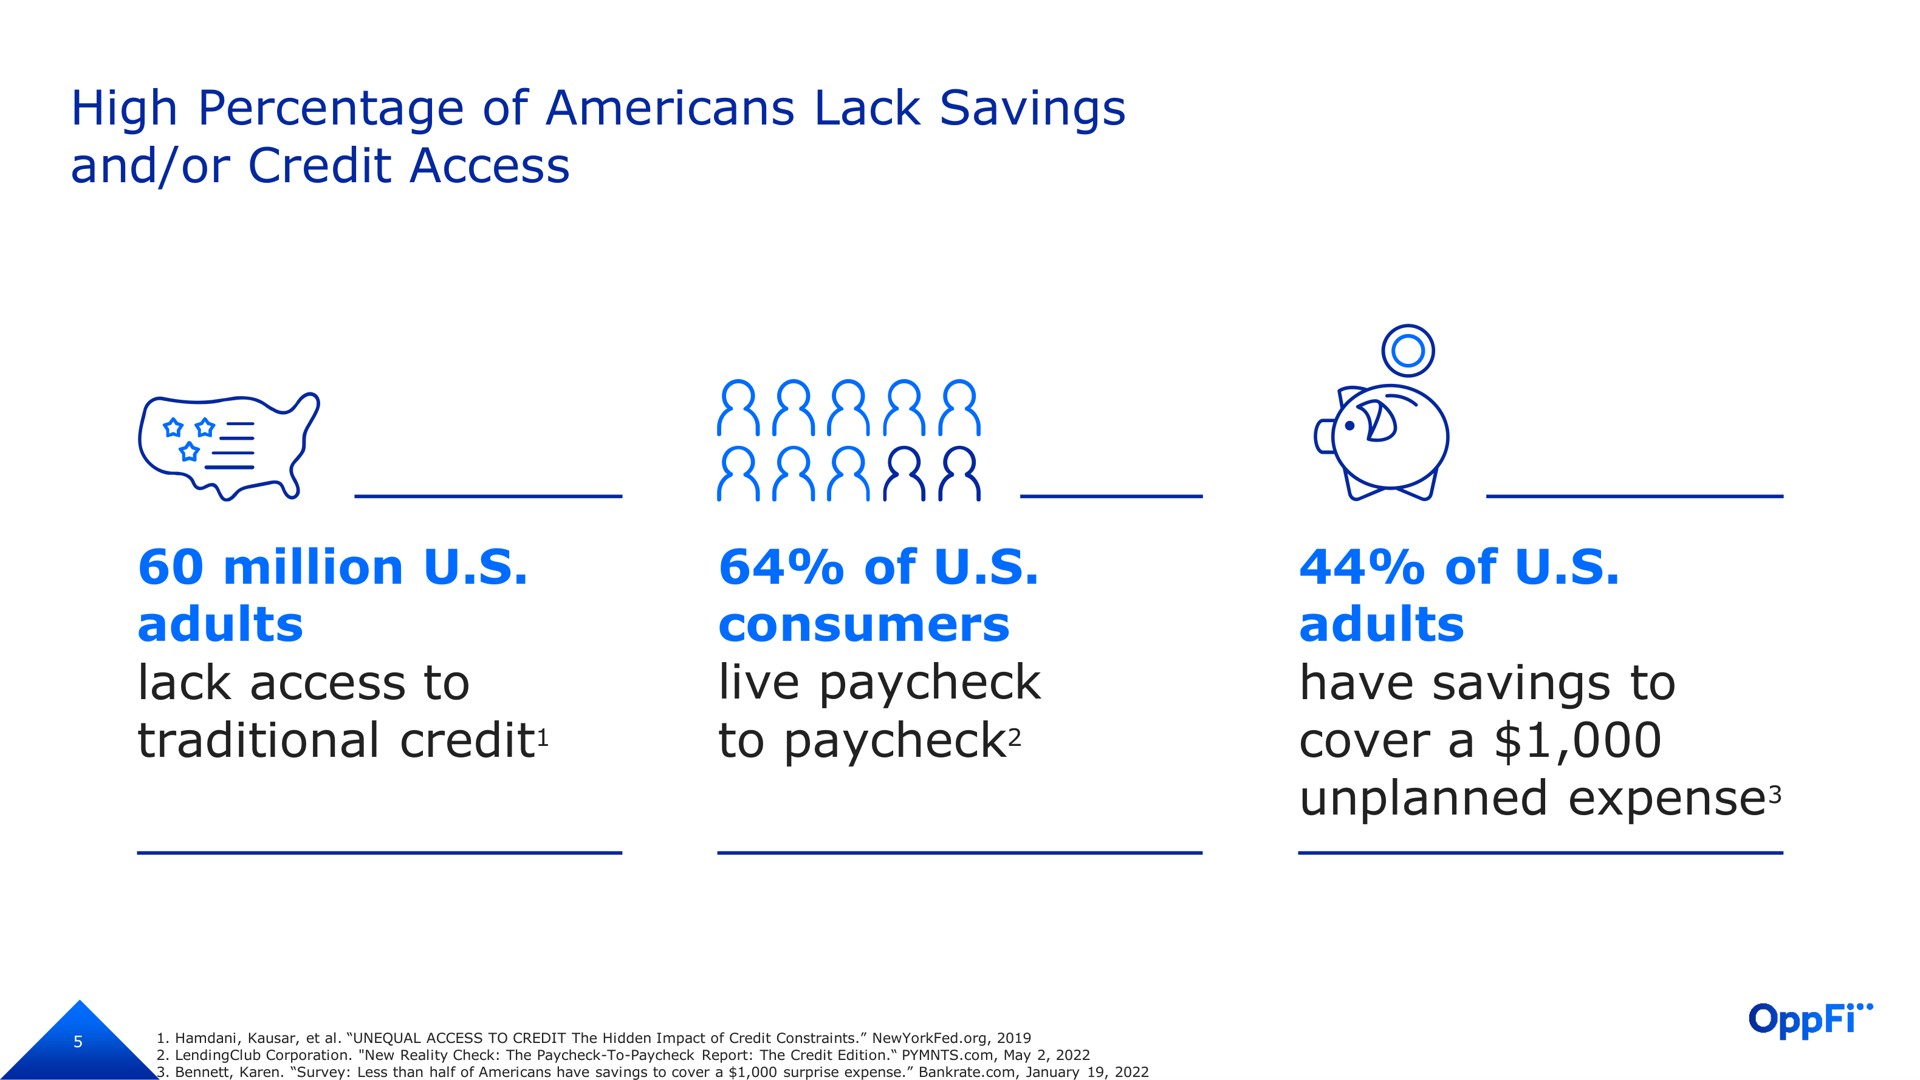 high percentage of lack savings and or credit access million adults lack access to traditional credit of consumers live to of adults have savings to cover a unplanned expense expense | OppFi